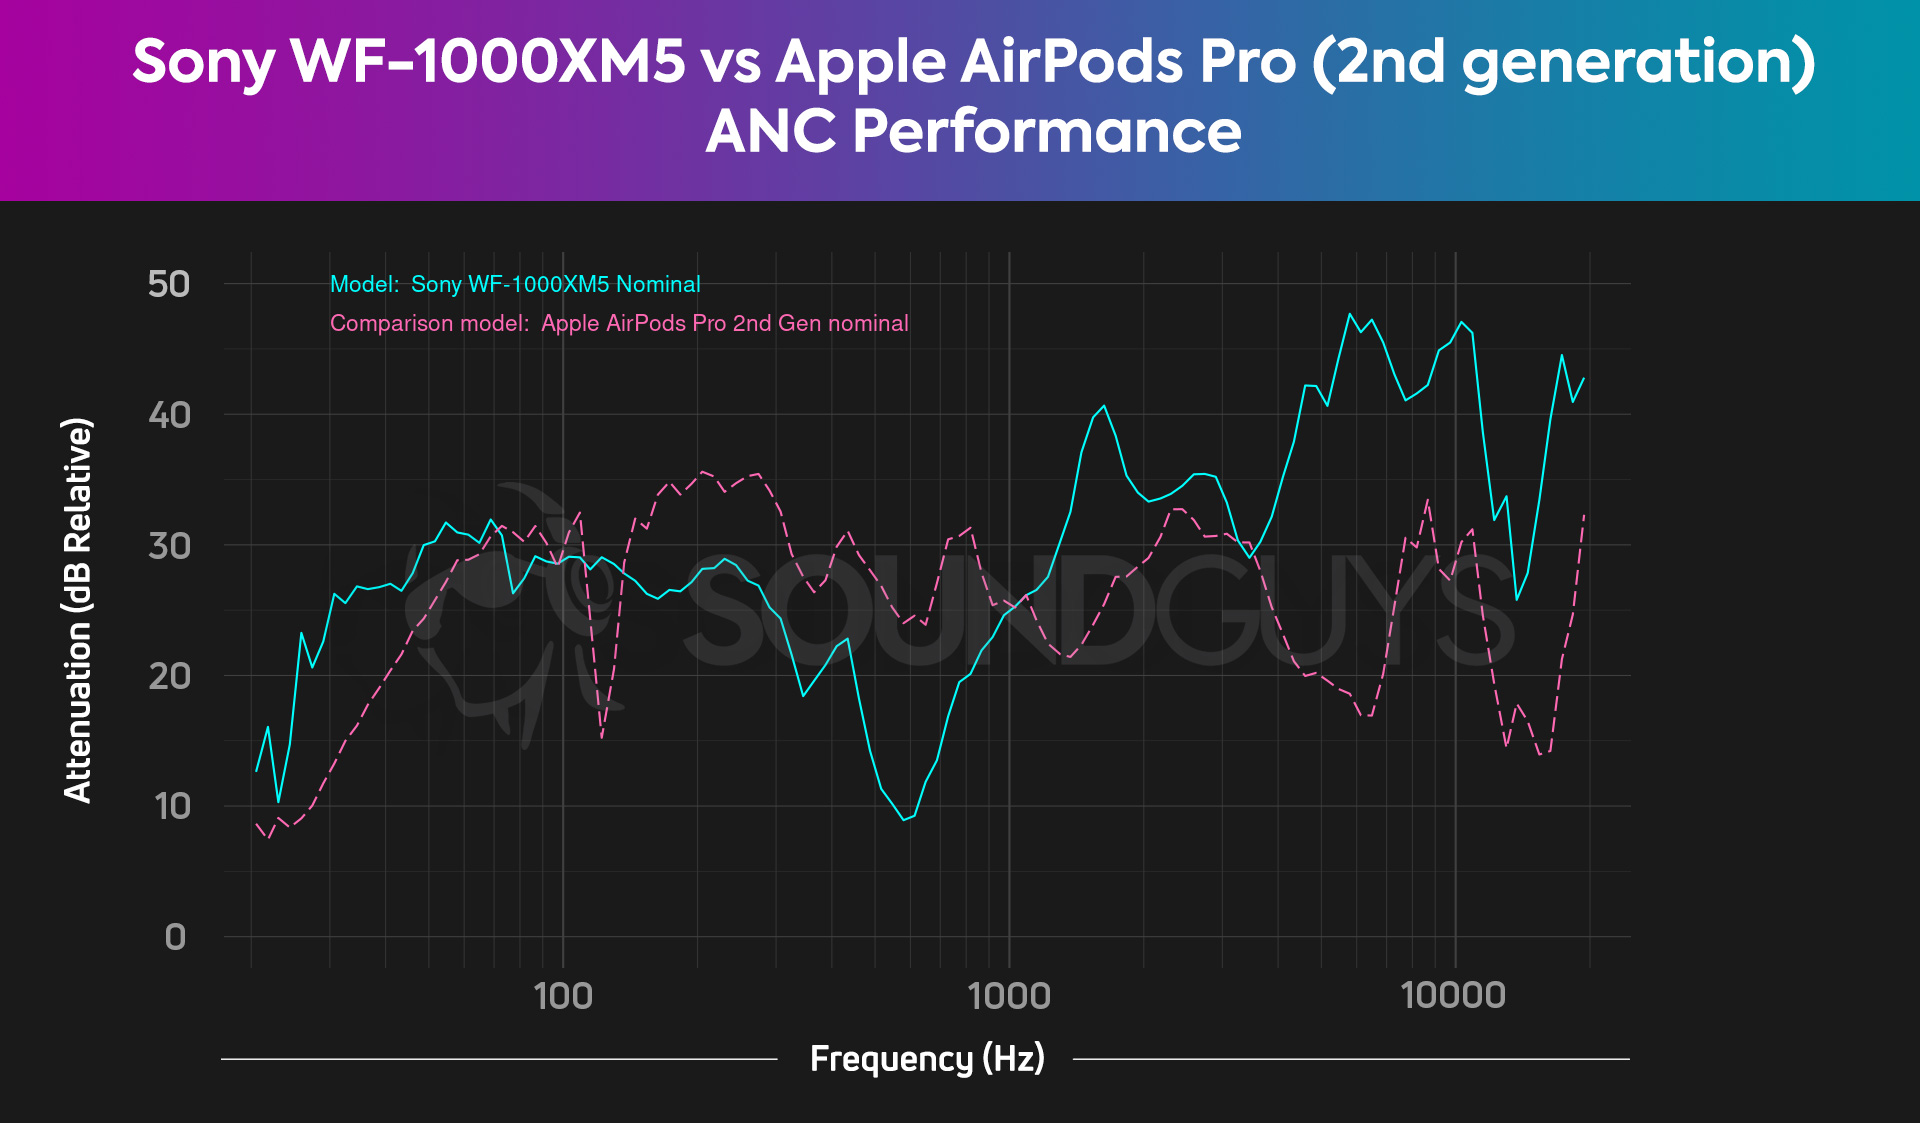 A chart compares the Sony WF-1000XM5 vs Apple AirPods Pro 2nd generation ANC performance.